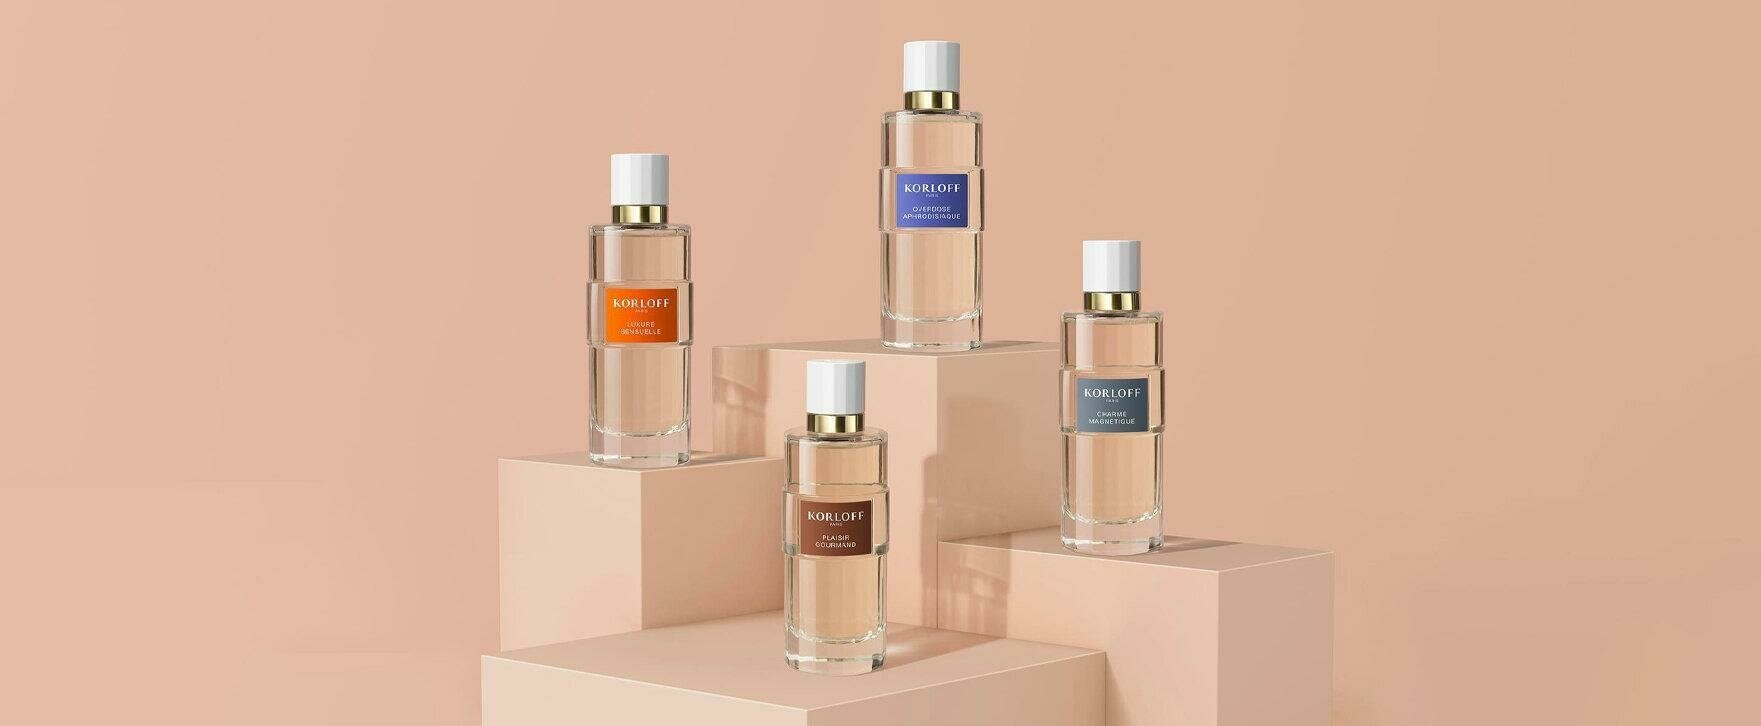 A Fragrance Journey Through Emotions: The New Niche Perfume Collection "Facettes" by Korloff